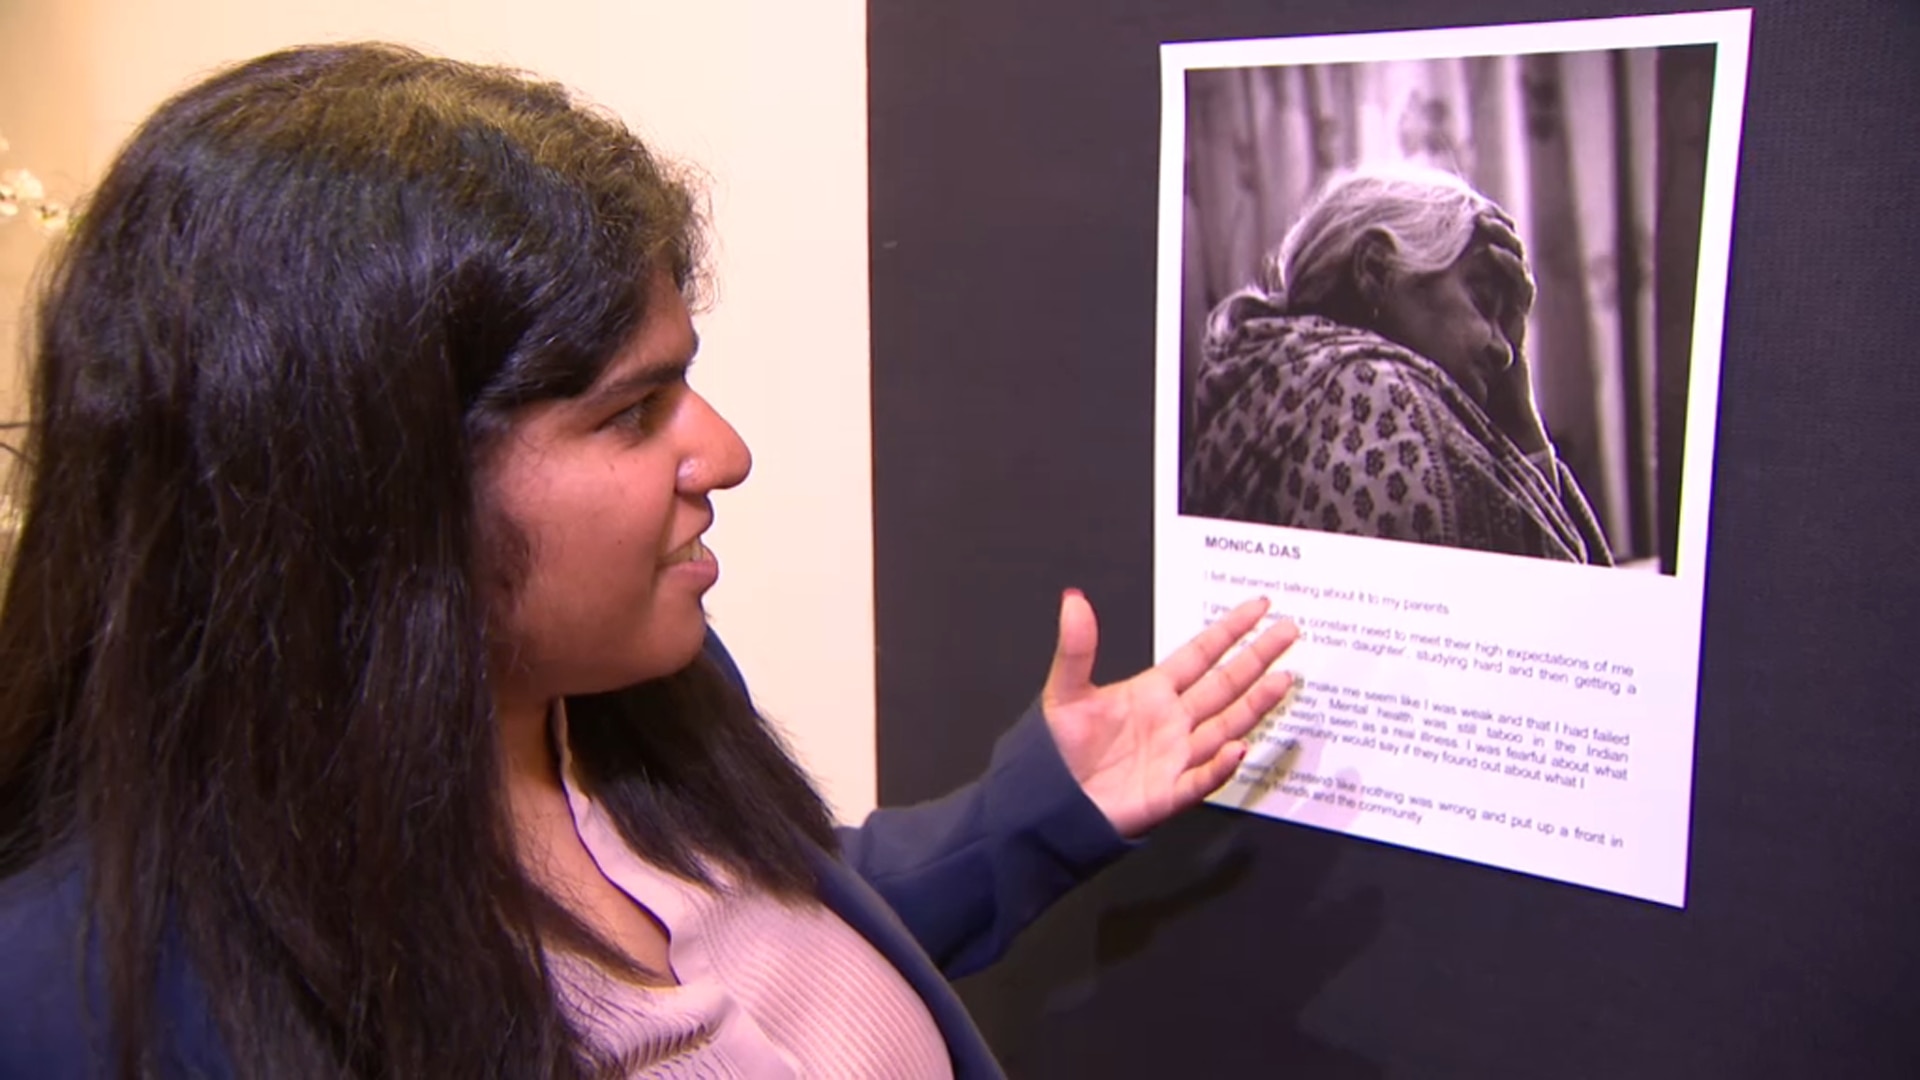 Monica Das has depression and anxiety and said her images helped her express the shame she felt when she was first diagnosed.